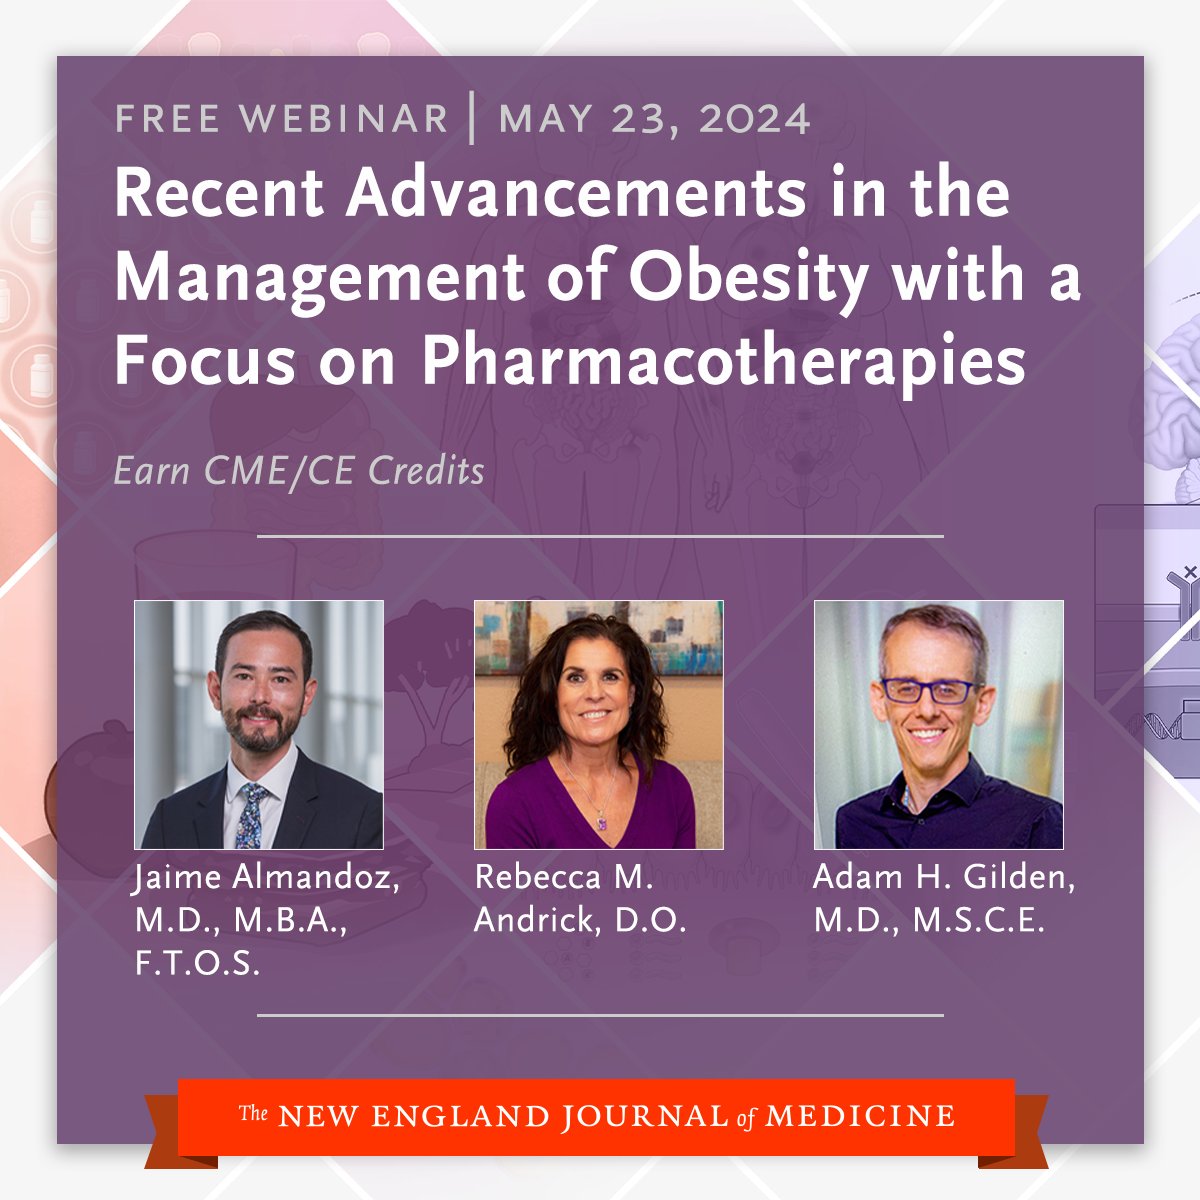 Earn CME through this free webinar and gain a comprehensive understanding of recent advancements in the management of obesity with a focus on pharmacotherapies. Learn more and reserve your spot: nej.md/3UsdqpA